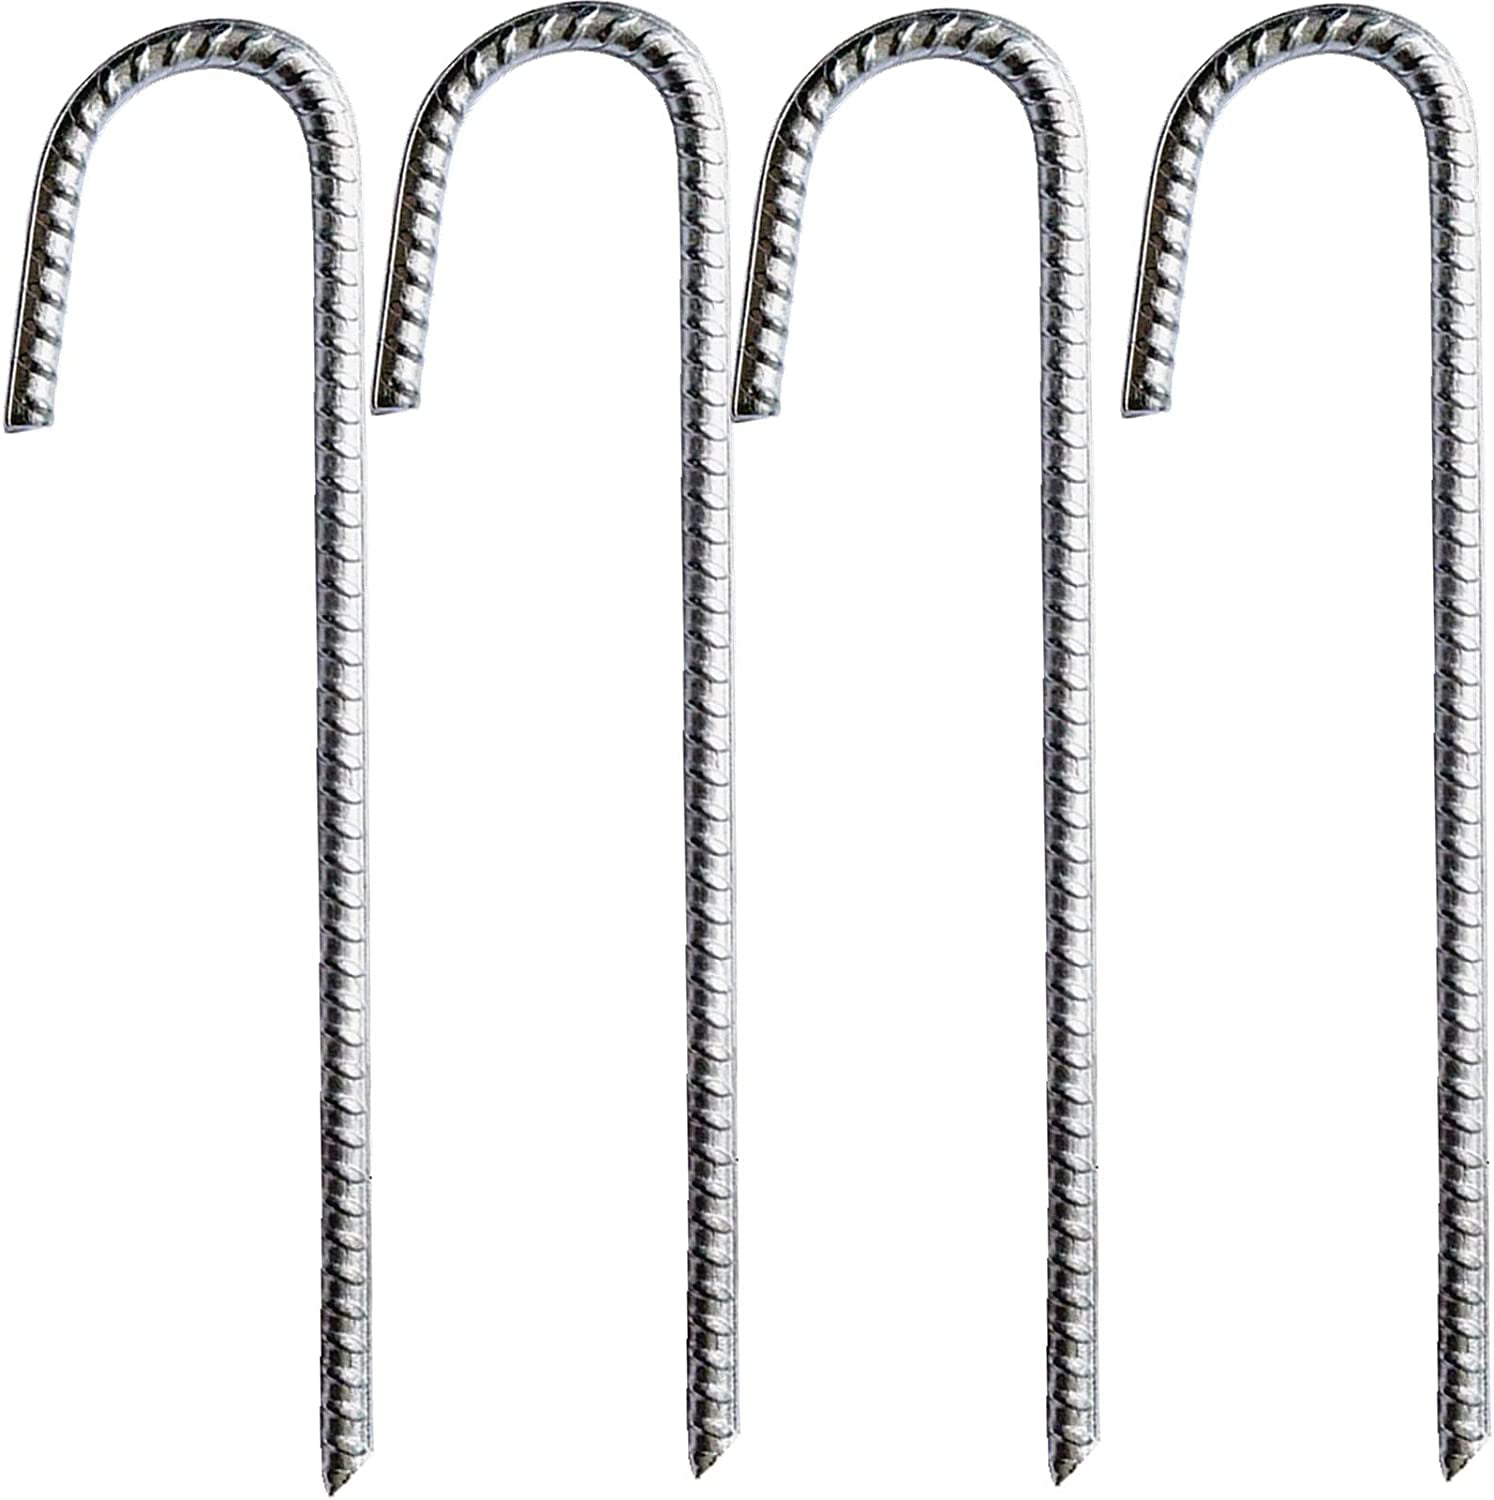 20 Galvanised Heavy Duty Ground Stakes Anchorage Tent Pegs For Marquees Gazebos 